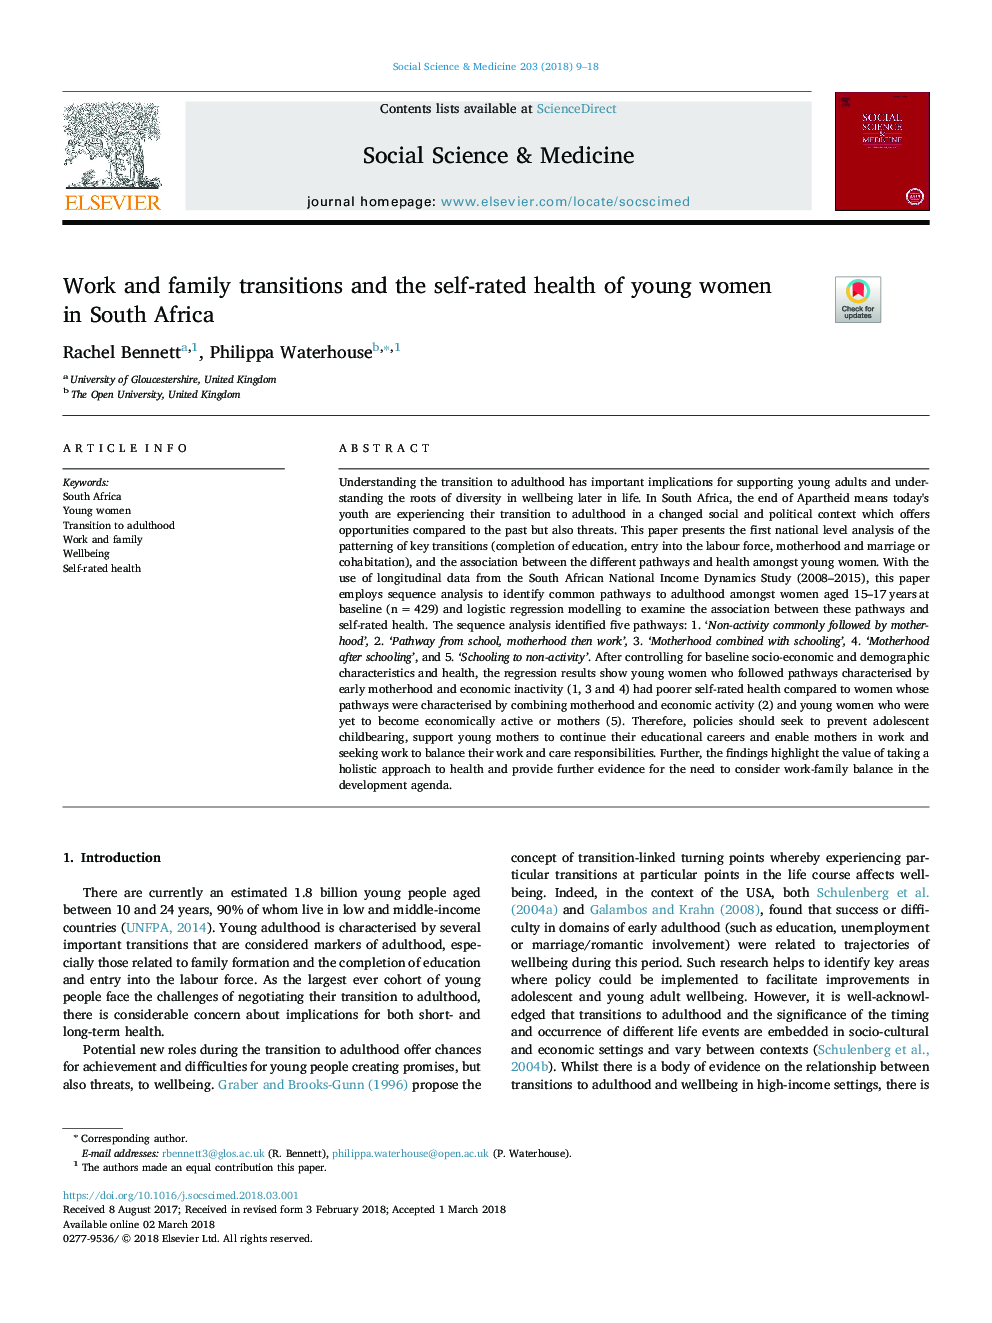 Work and family transitions and the self-rated health of young women in South Africa